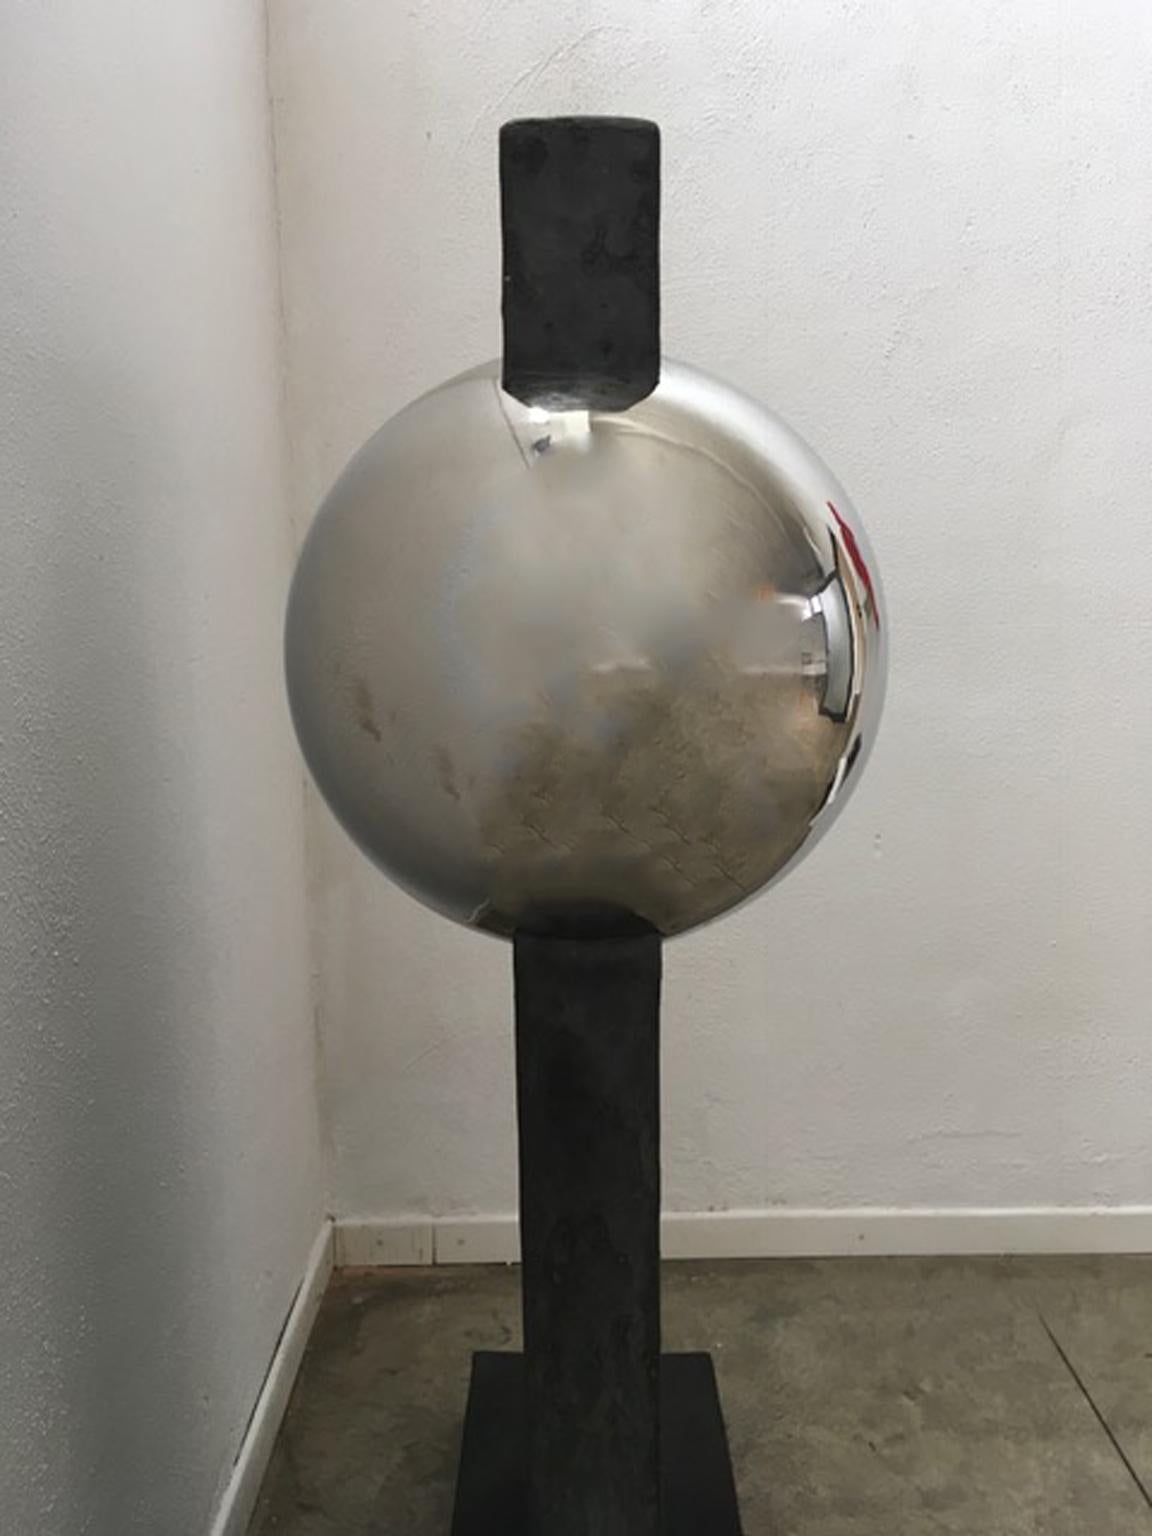 Stele with sphere Italy 2000 Polyester Grey Colored Mortar with Chrome Sphere - Abstract Geometric Sculpture by Antonio De Martino